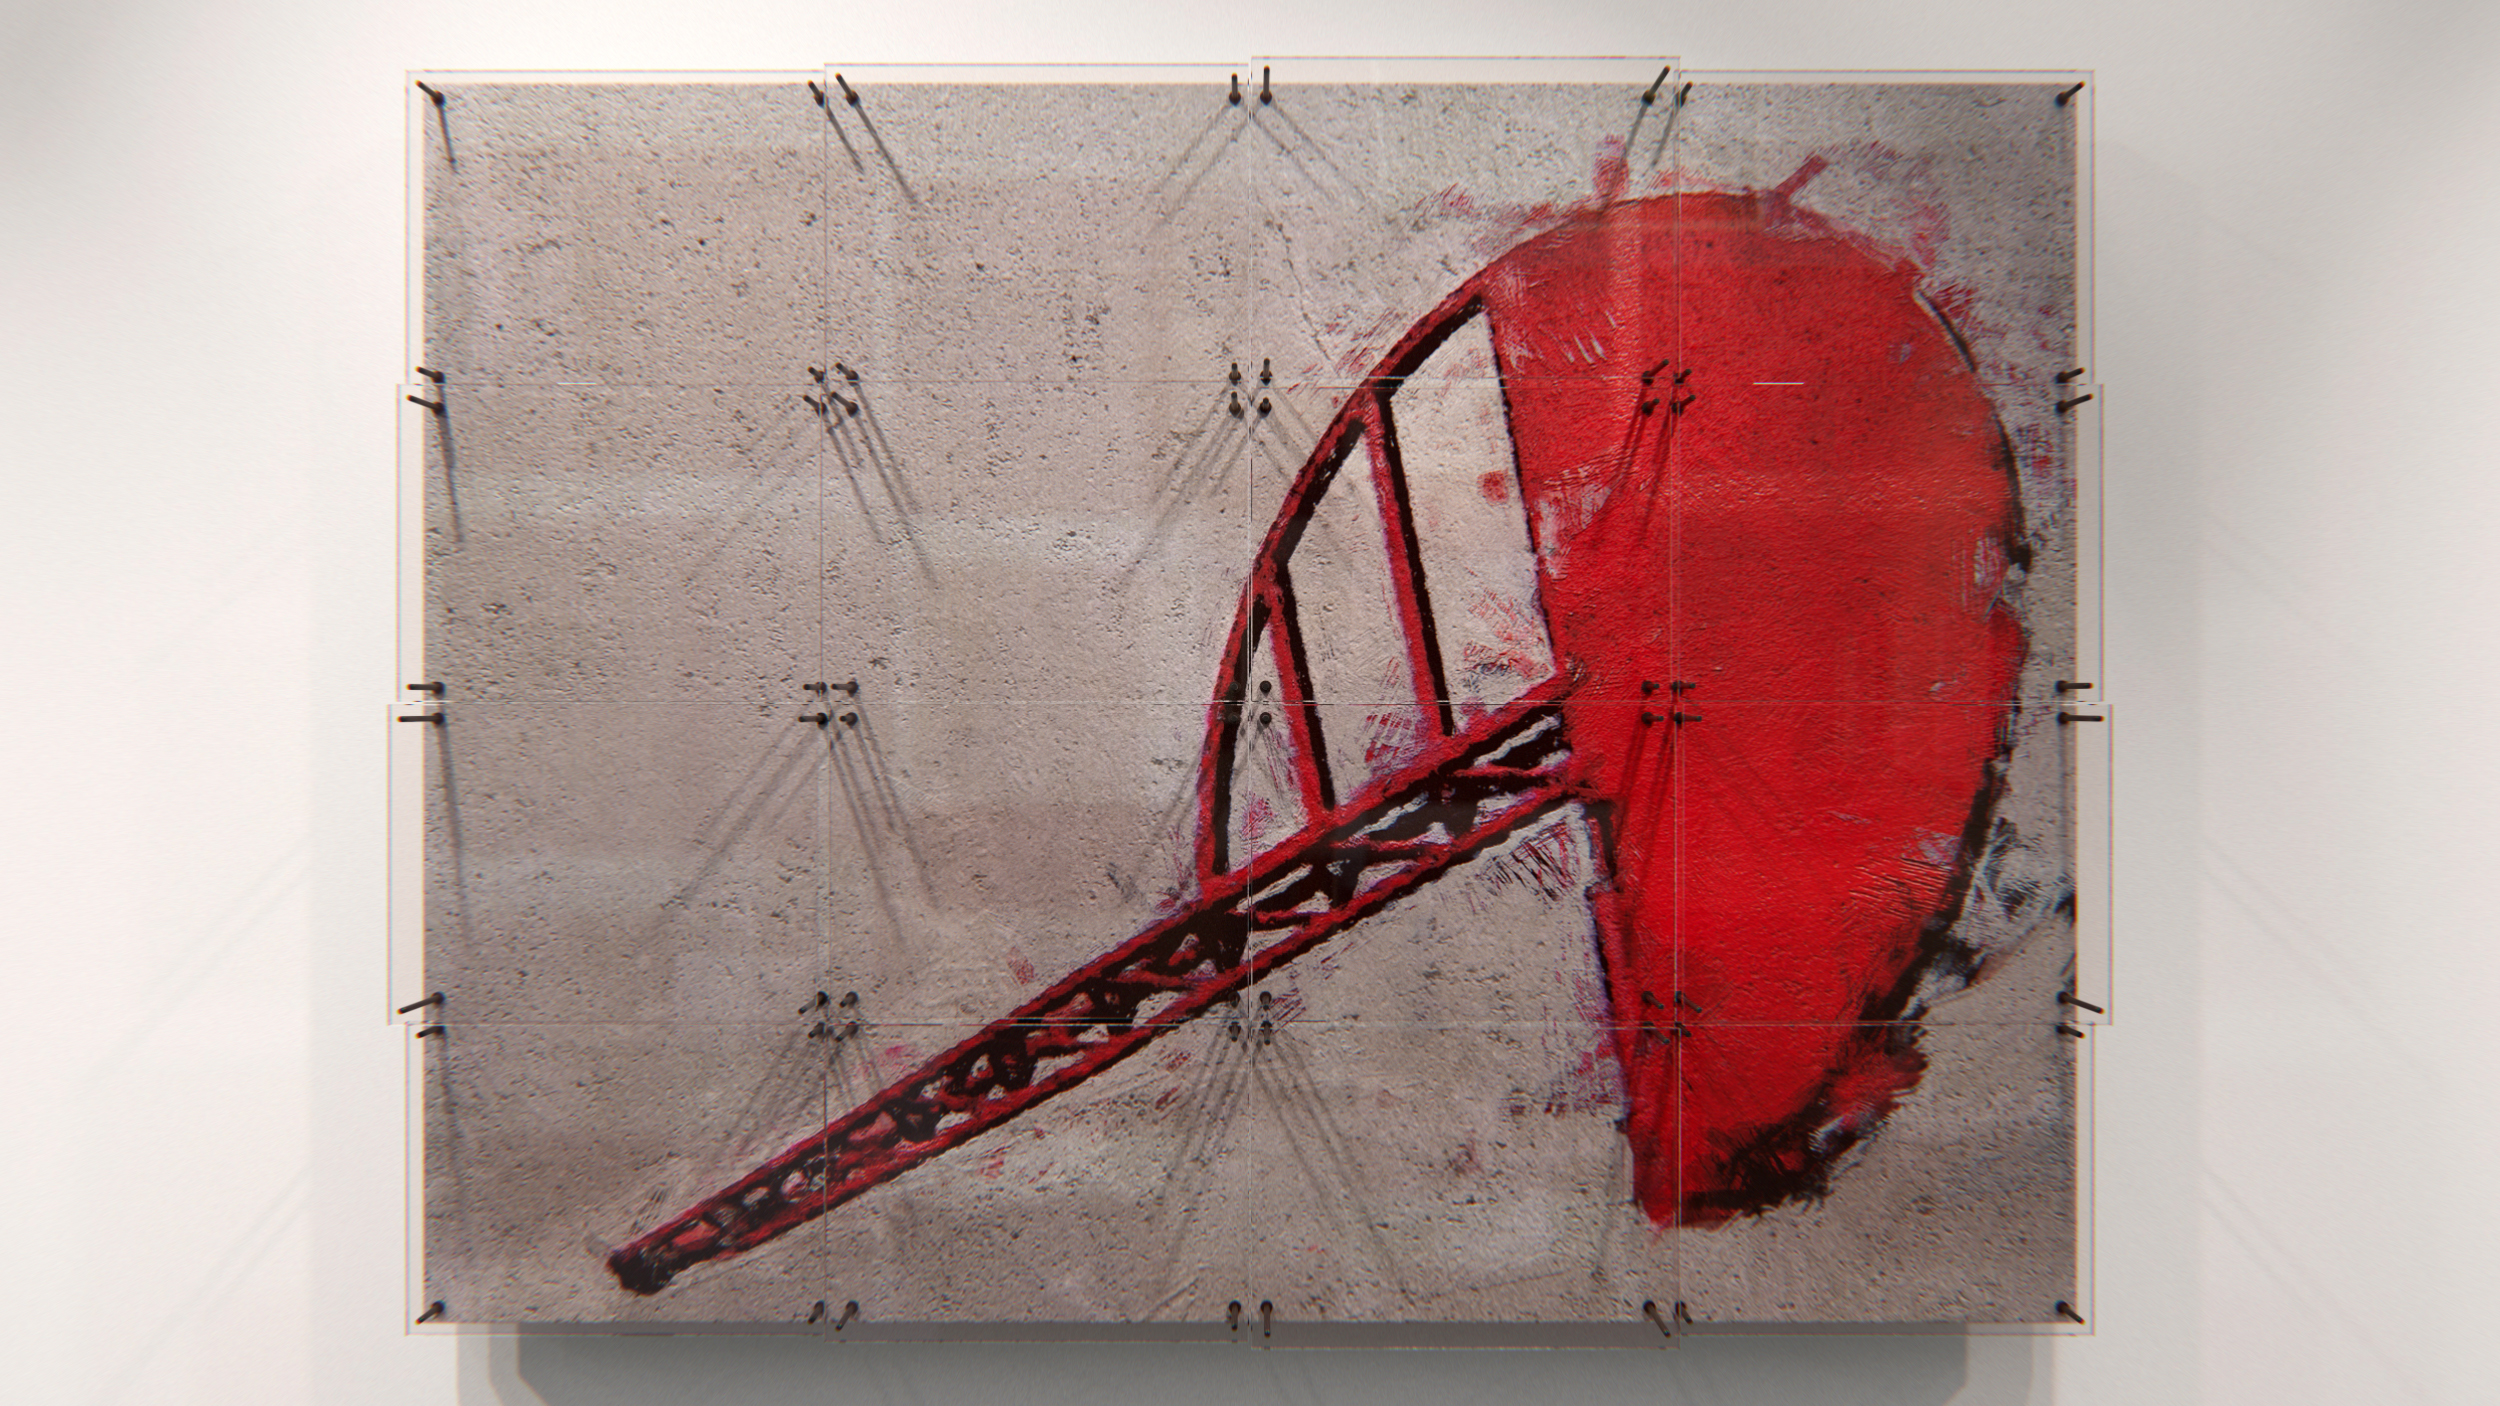  Bernard Tschumi 160 х 120 cm  oil, canvas, plaster, metal, plexiglas  In my eyes this is one of the most amazing archi- tects, a deep thinker who values method over form. He delineates active processes, tensions, energy flows and tries to create a p